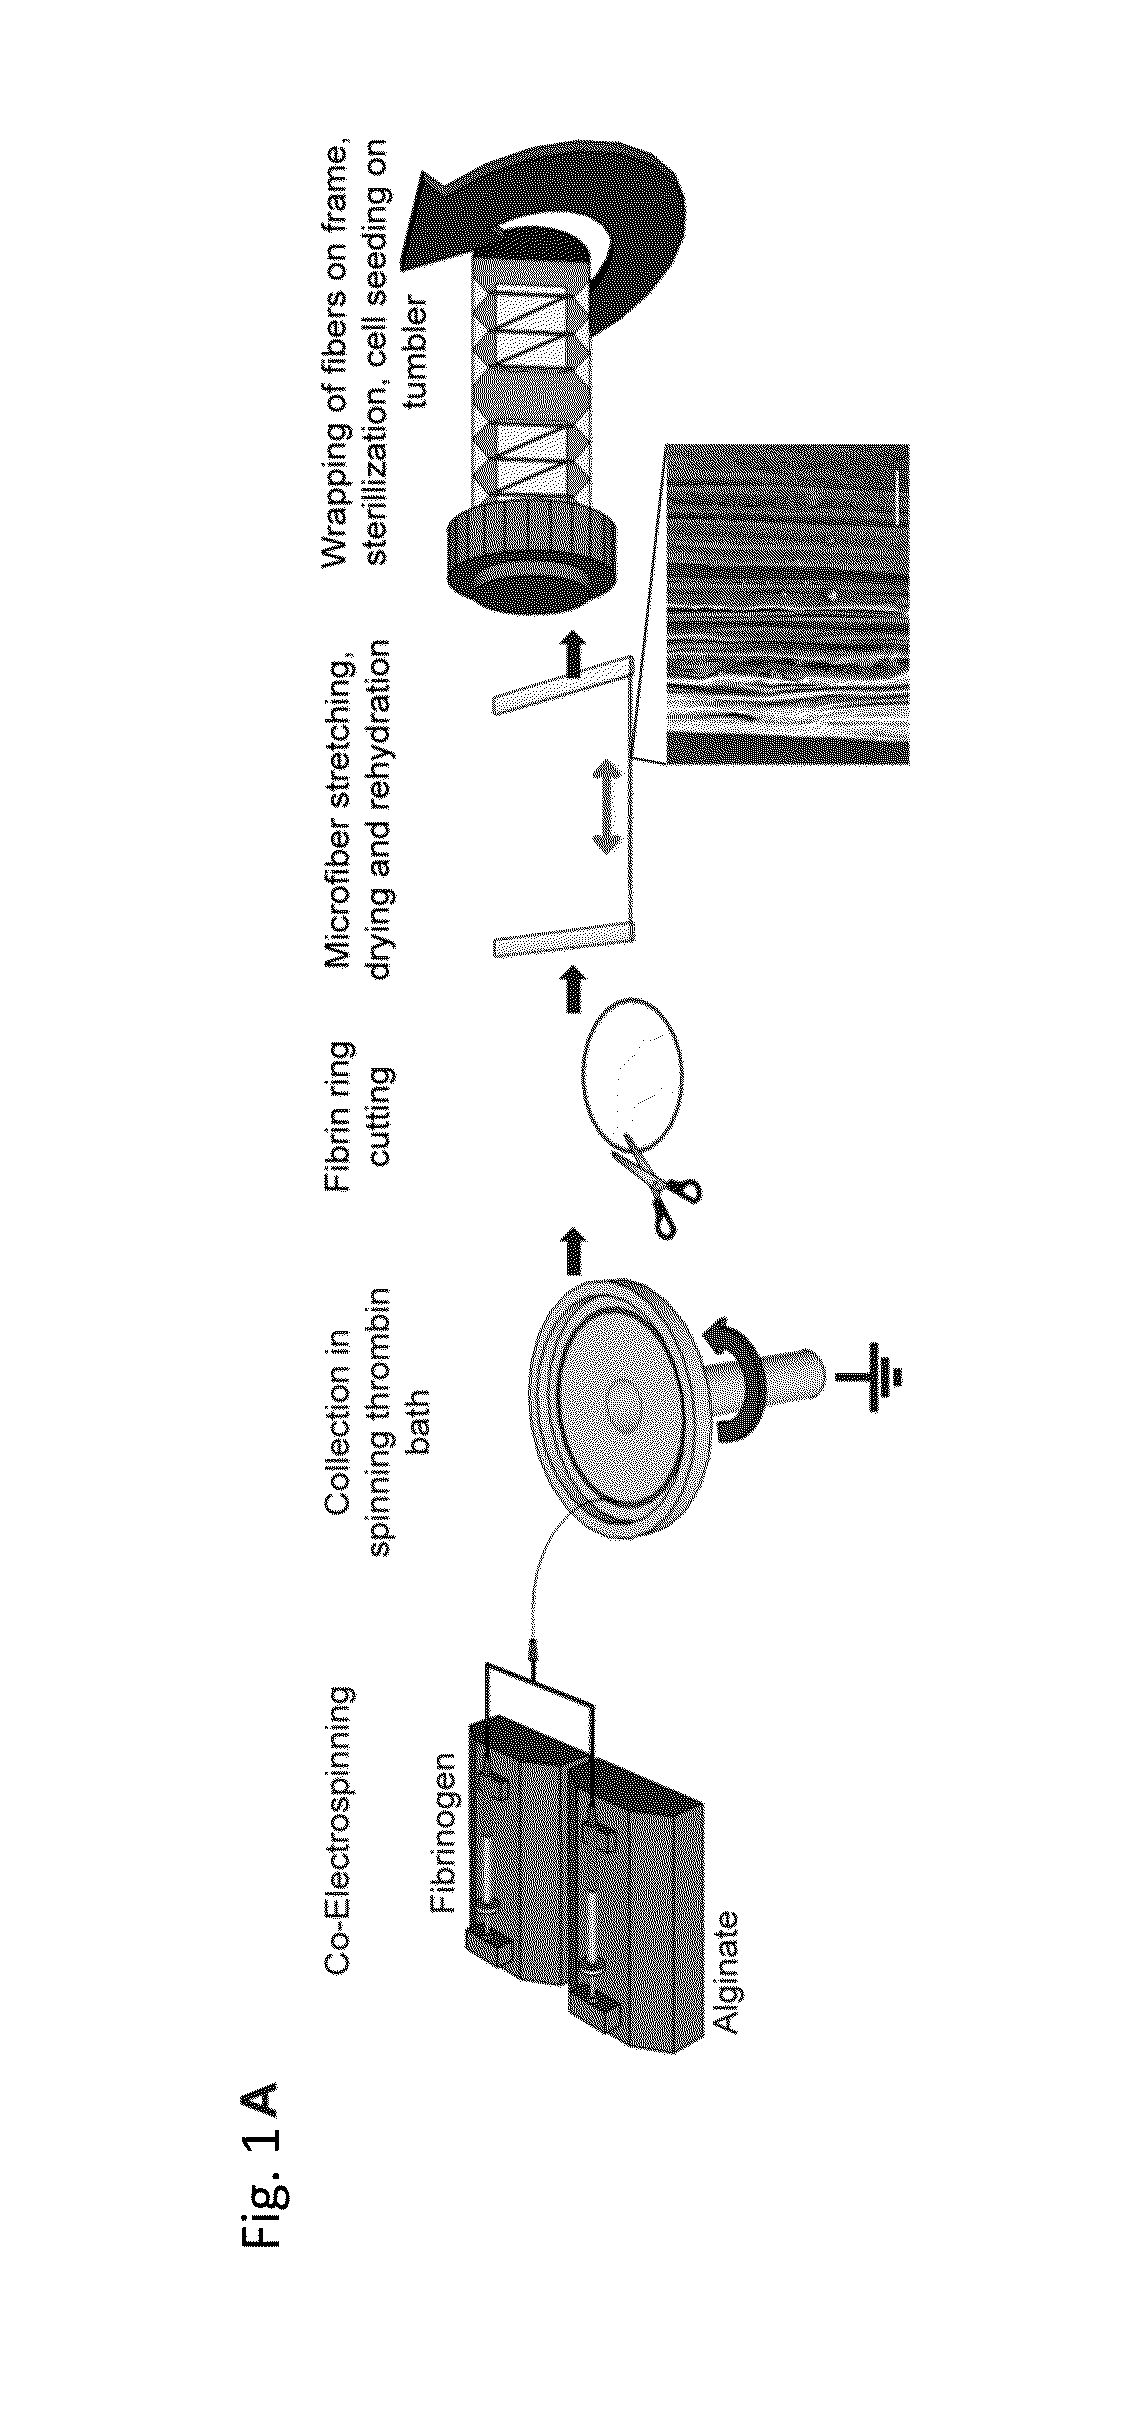 Electrostretched polymer microfibers for microvasculature development